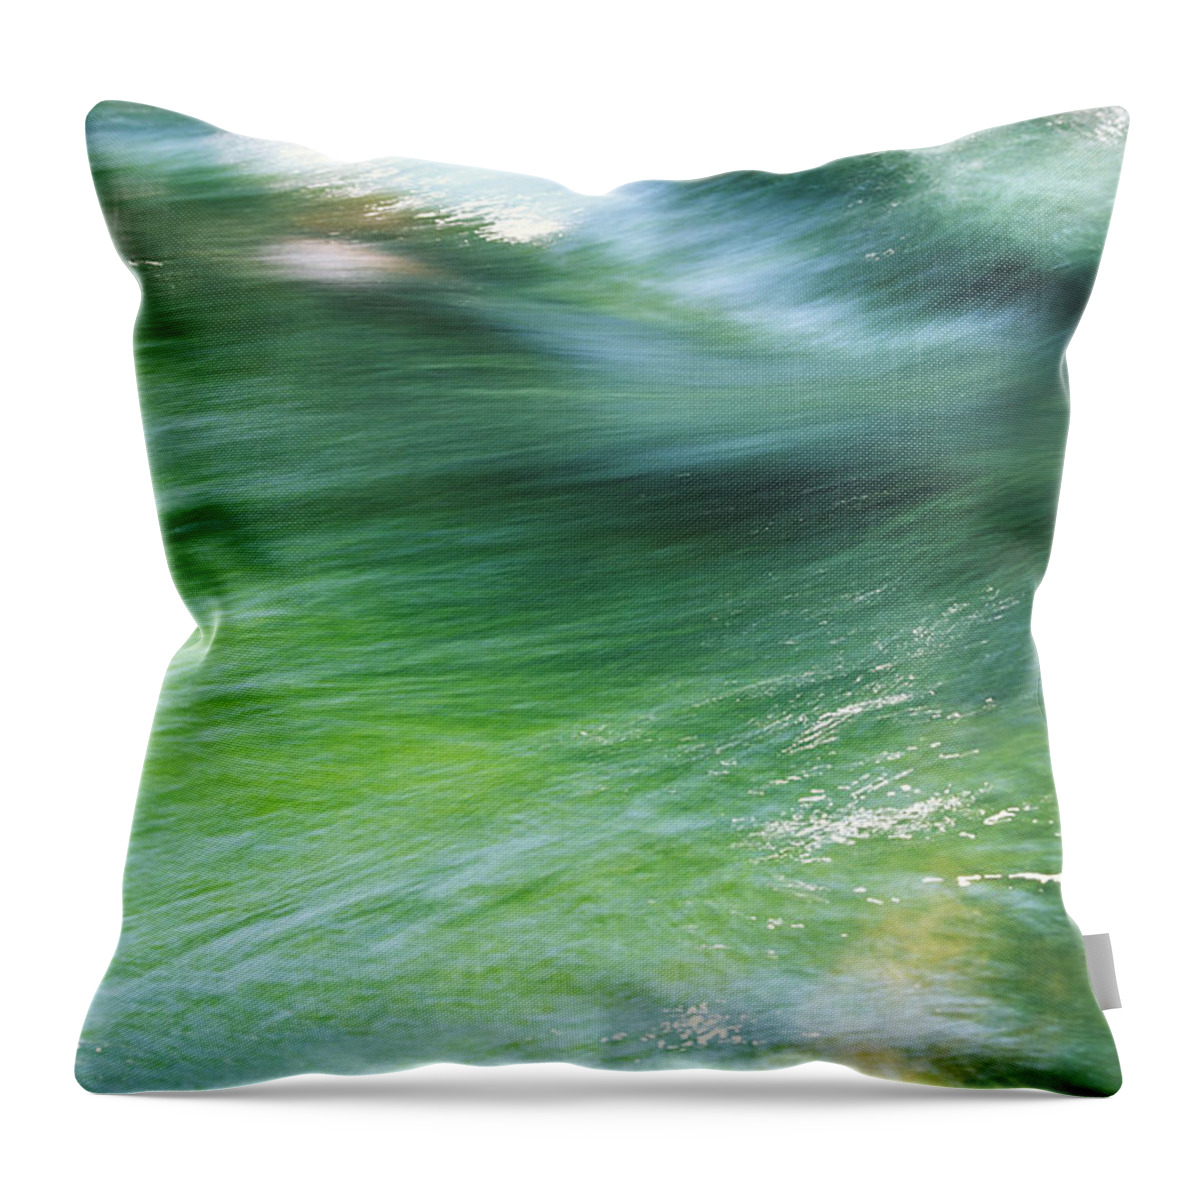 Blurred Motion Throw Pillow featuring the photograph Water Stream #1 by Ooyoo